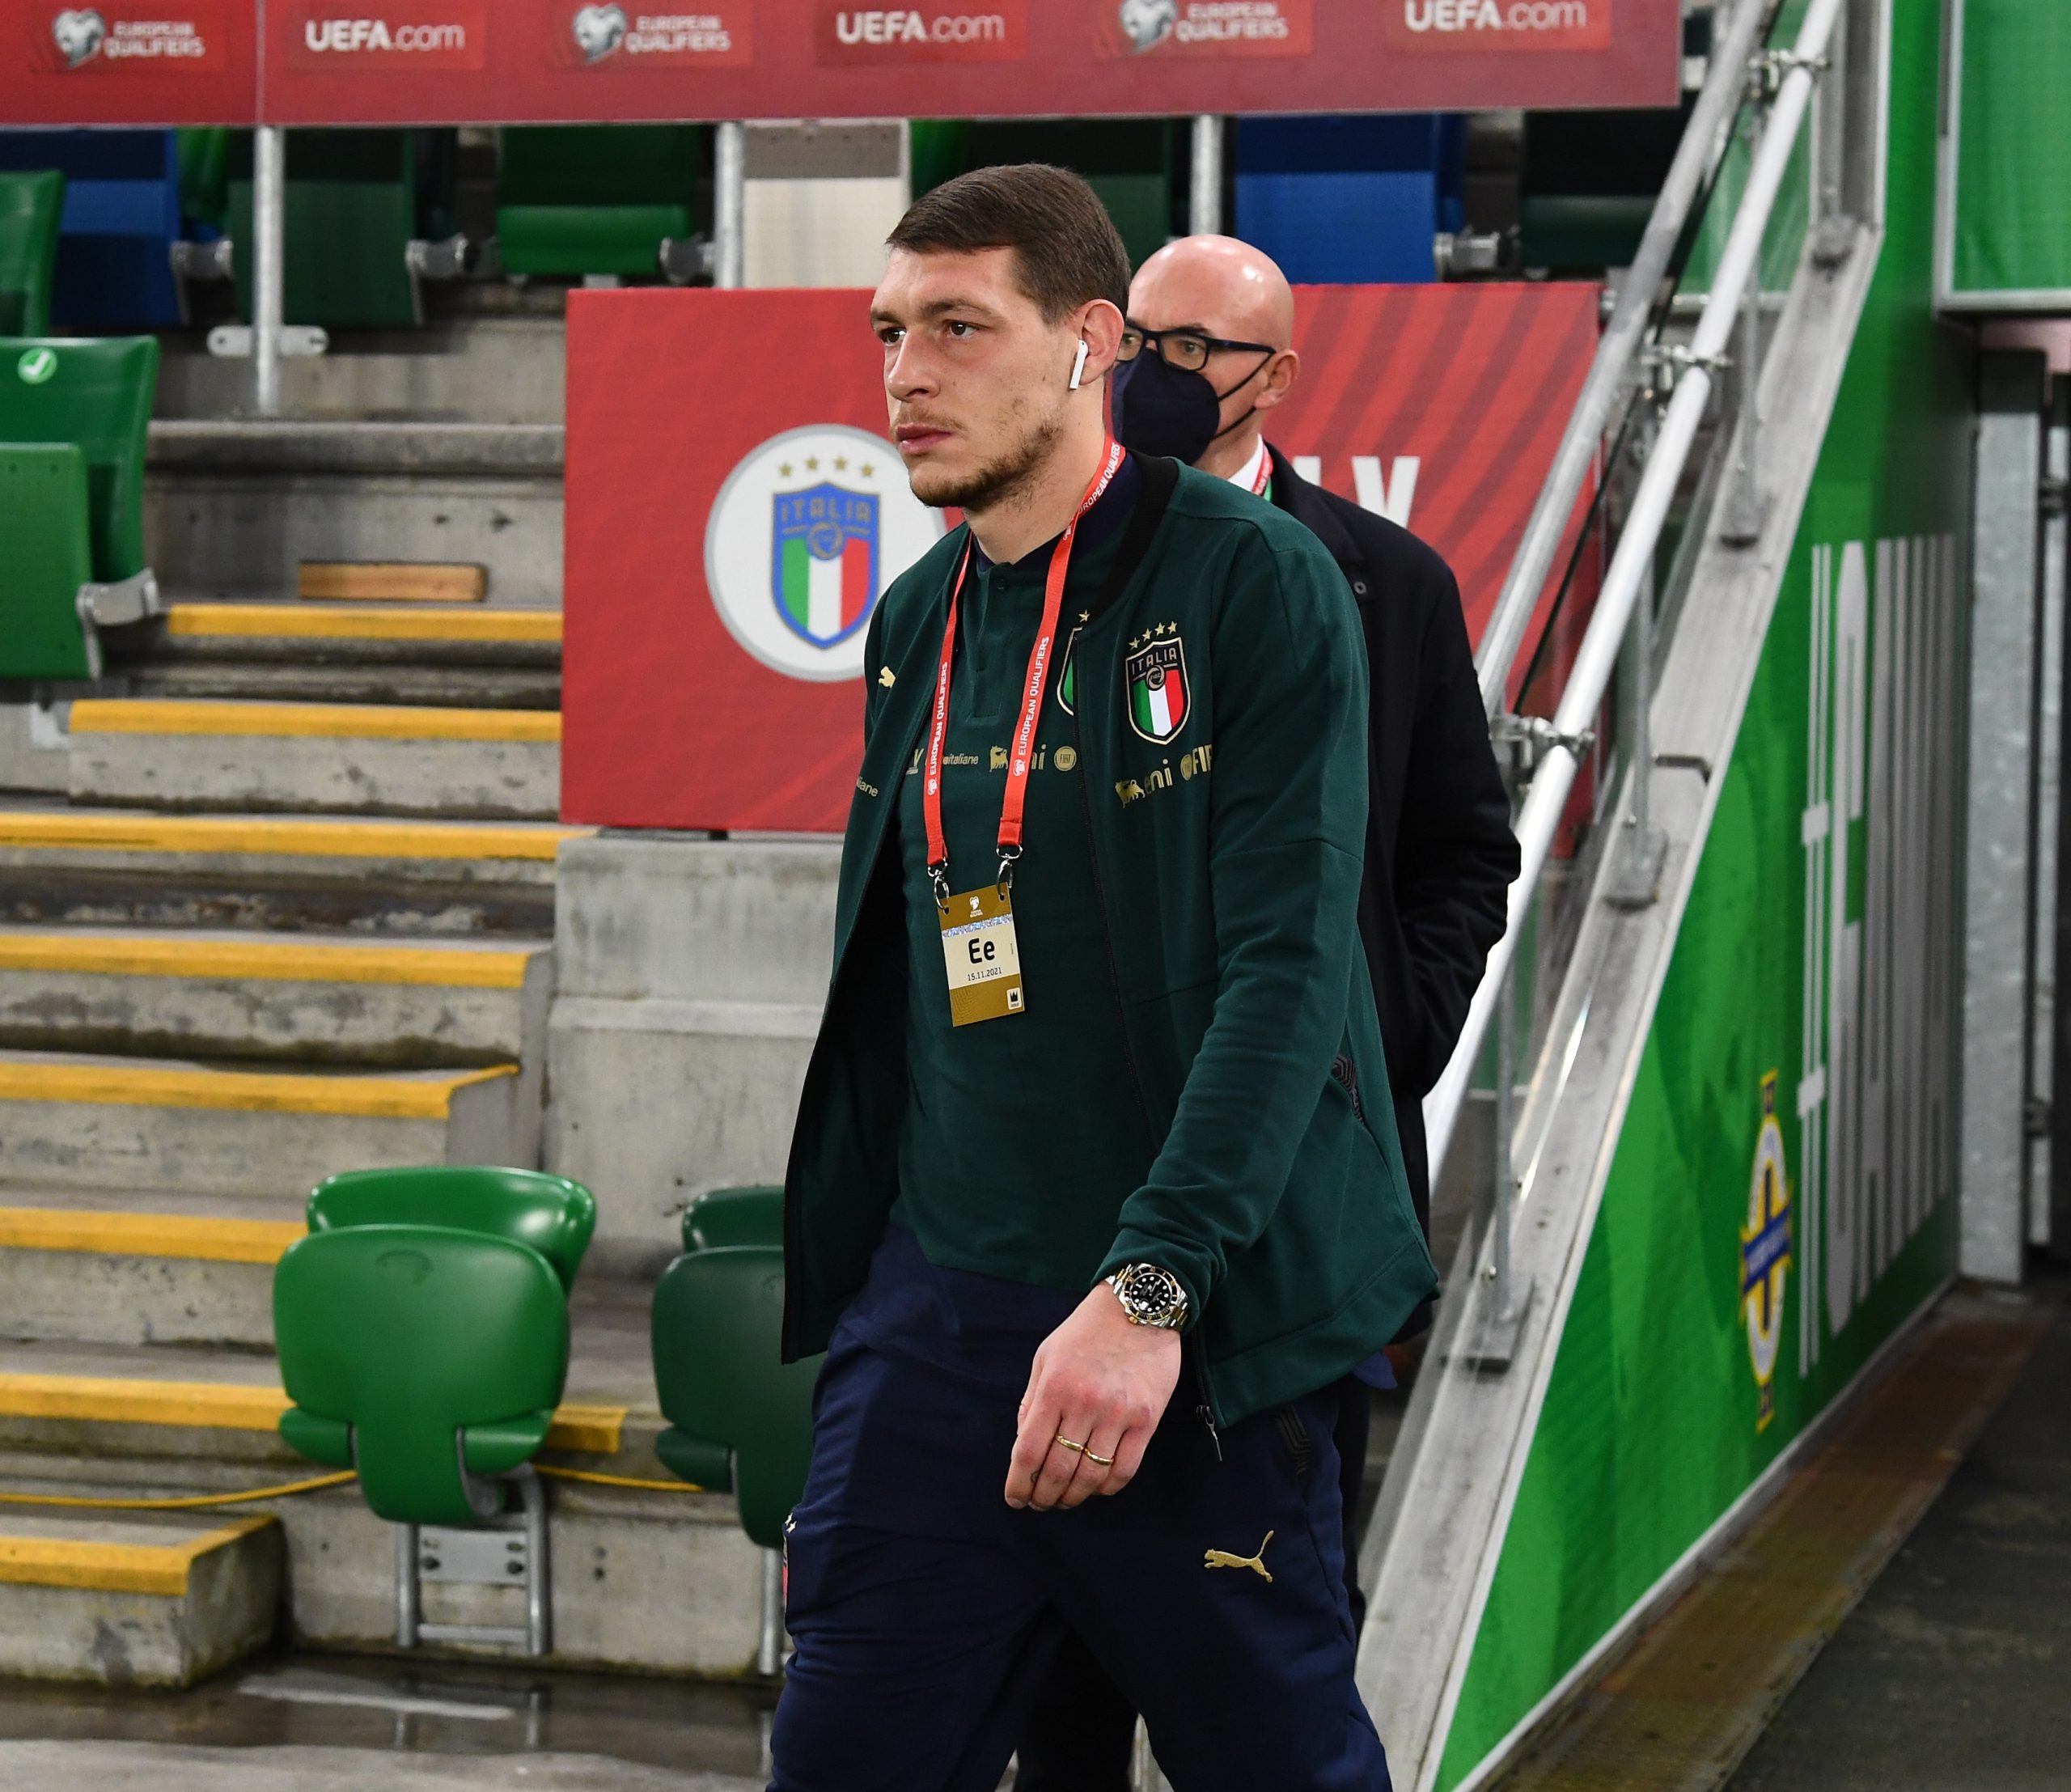 Andrea Belotti is also a transfer target for Spurs, Arsenal, Atletico, Milan and Atalanta. (Photo by Claudio Villa/Getty Images)